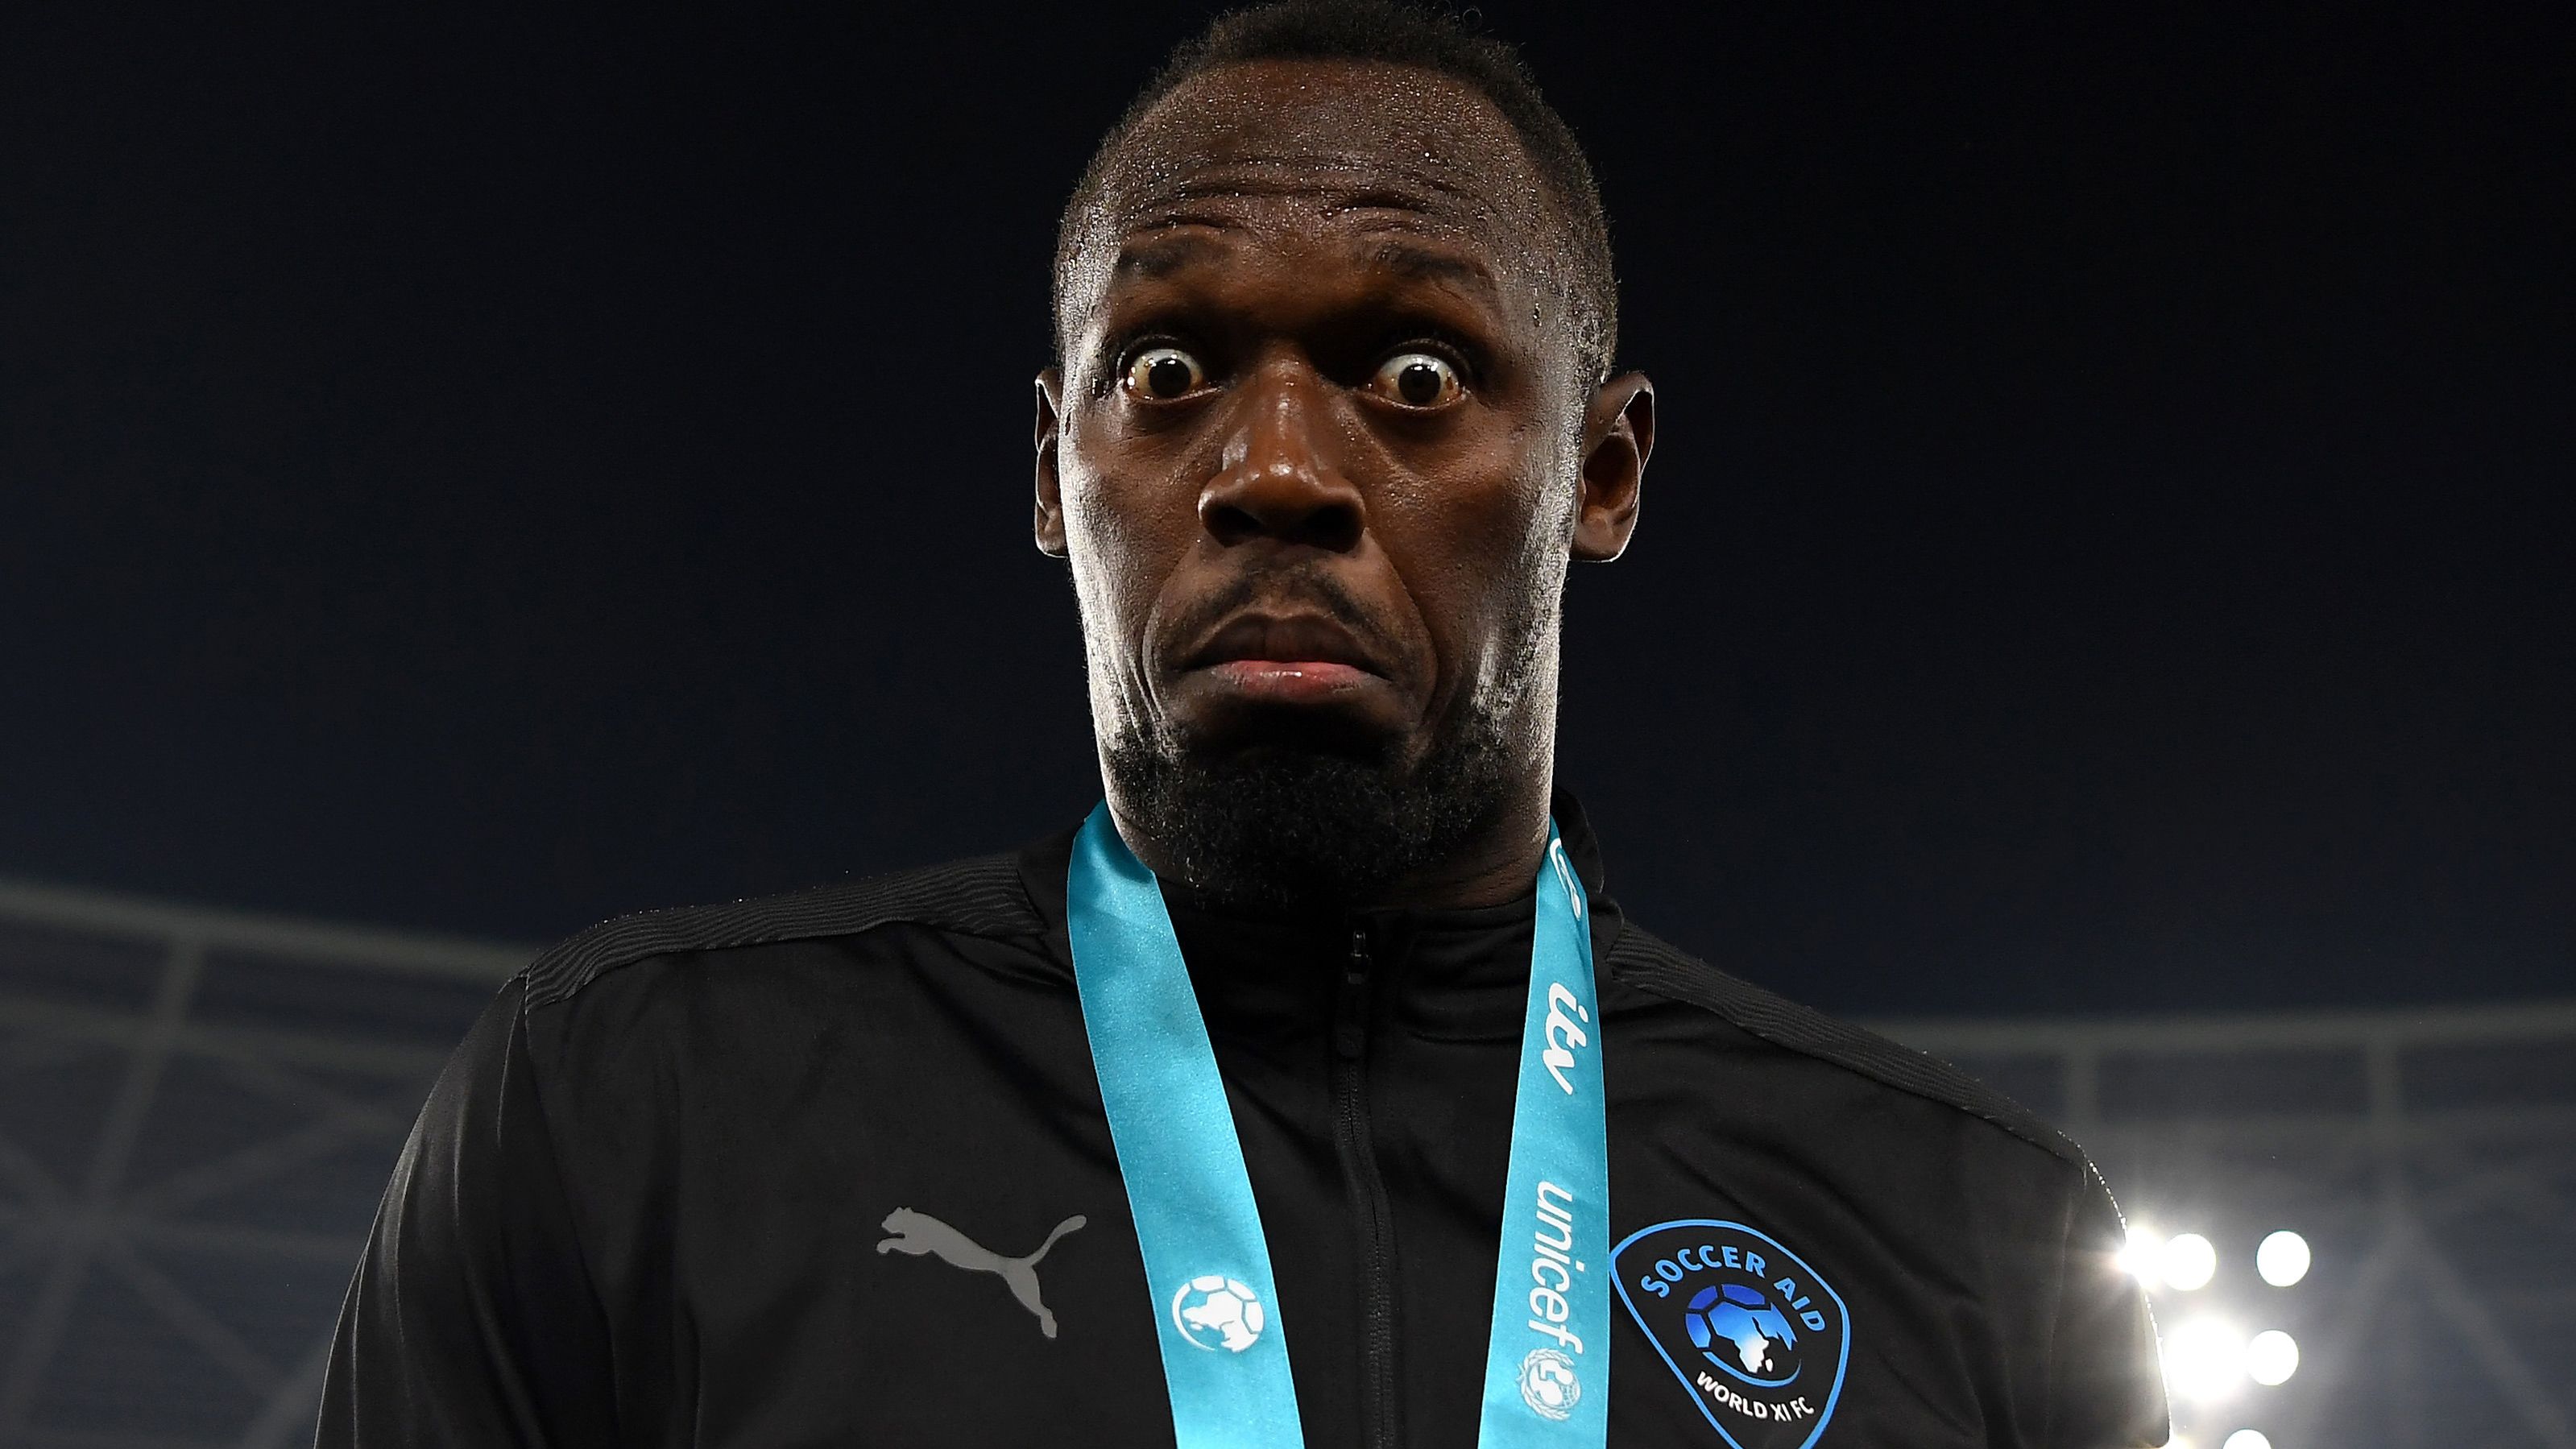 LONDON, ENGLAND - JUNE 12: Usain Bolt of World XI FC looks on after Soccer Aid for Unicef 2022 at London Stadium on June 12, 2022 in London, England. (Photo by Alex Davidson/Getty Images)